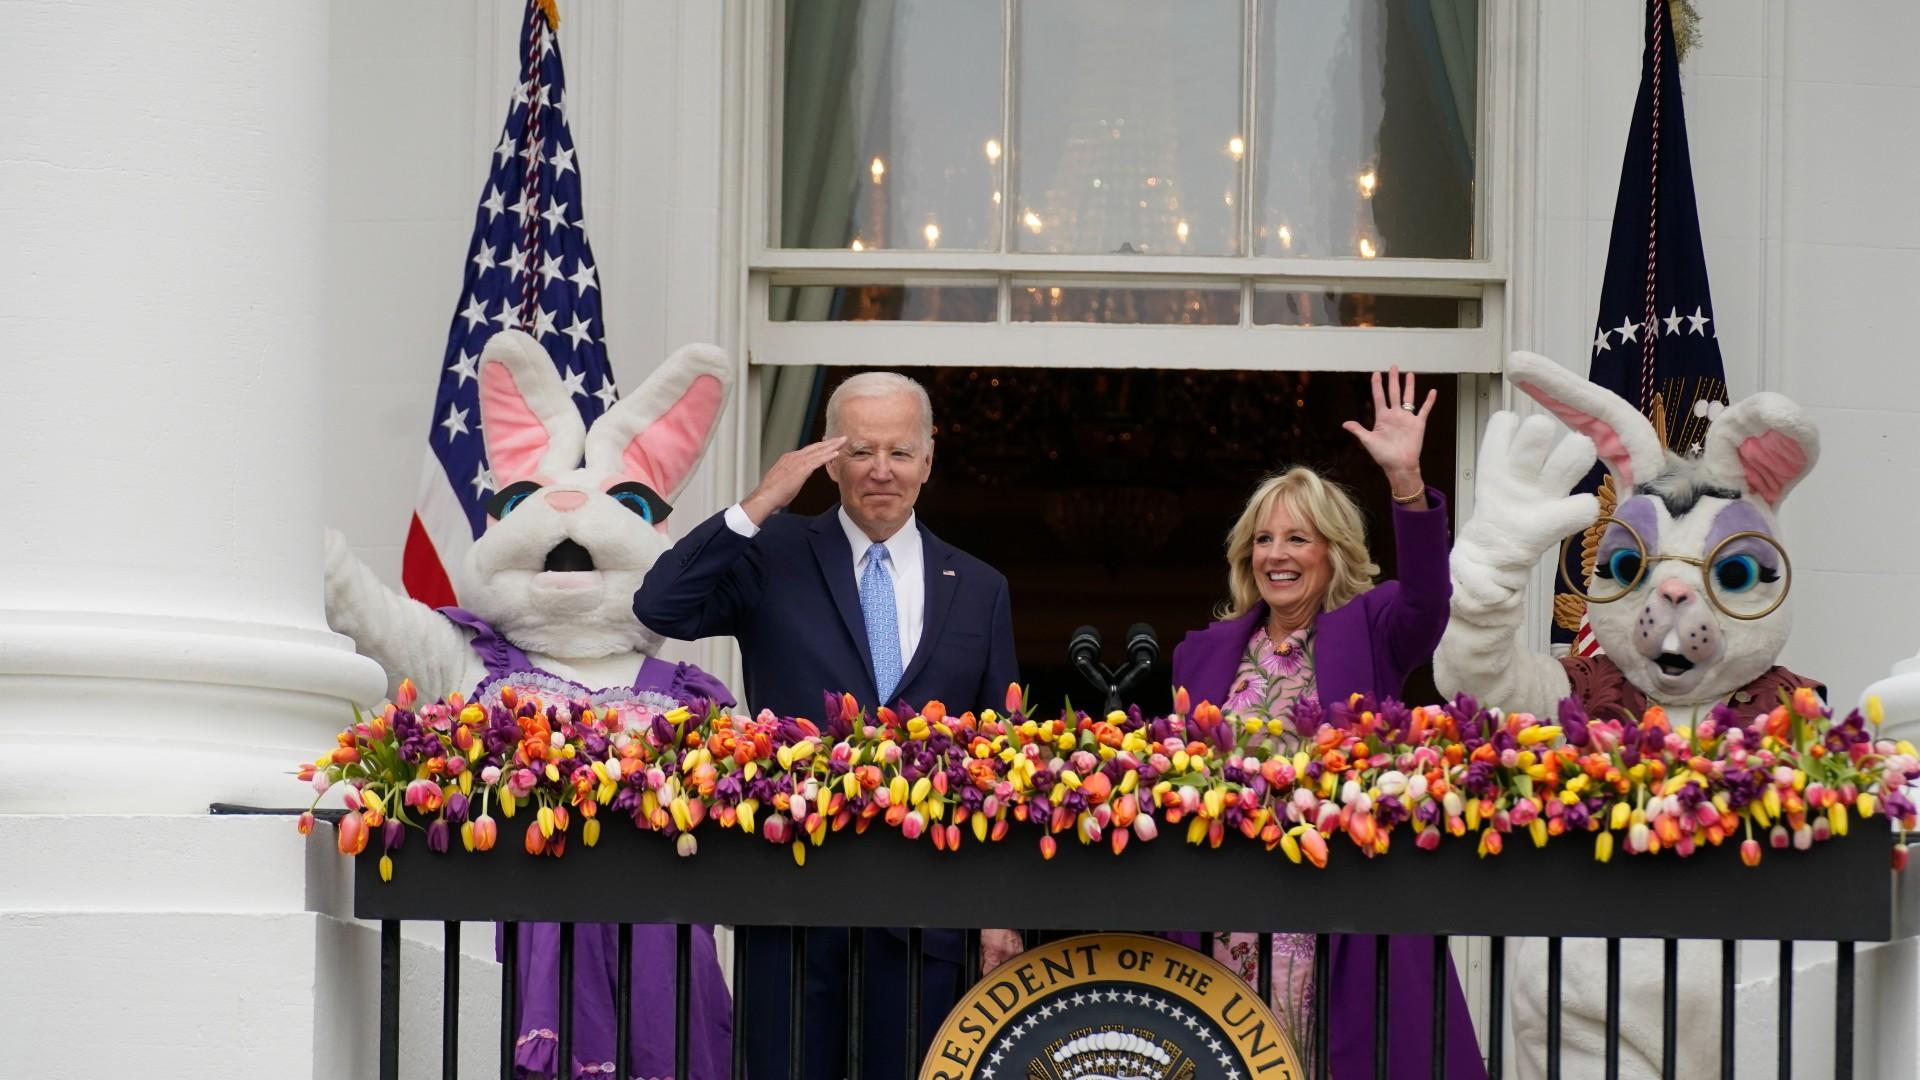 President Joe Biden appears and salutes with first lady Jill Biden and the Easter Bunnies on the Blue Room balcony at the White House during the White House Easter Egg Roll, Monday, April 18, 2022, in Washington. (AP Photo / Andrew Harnik)